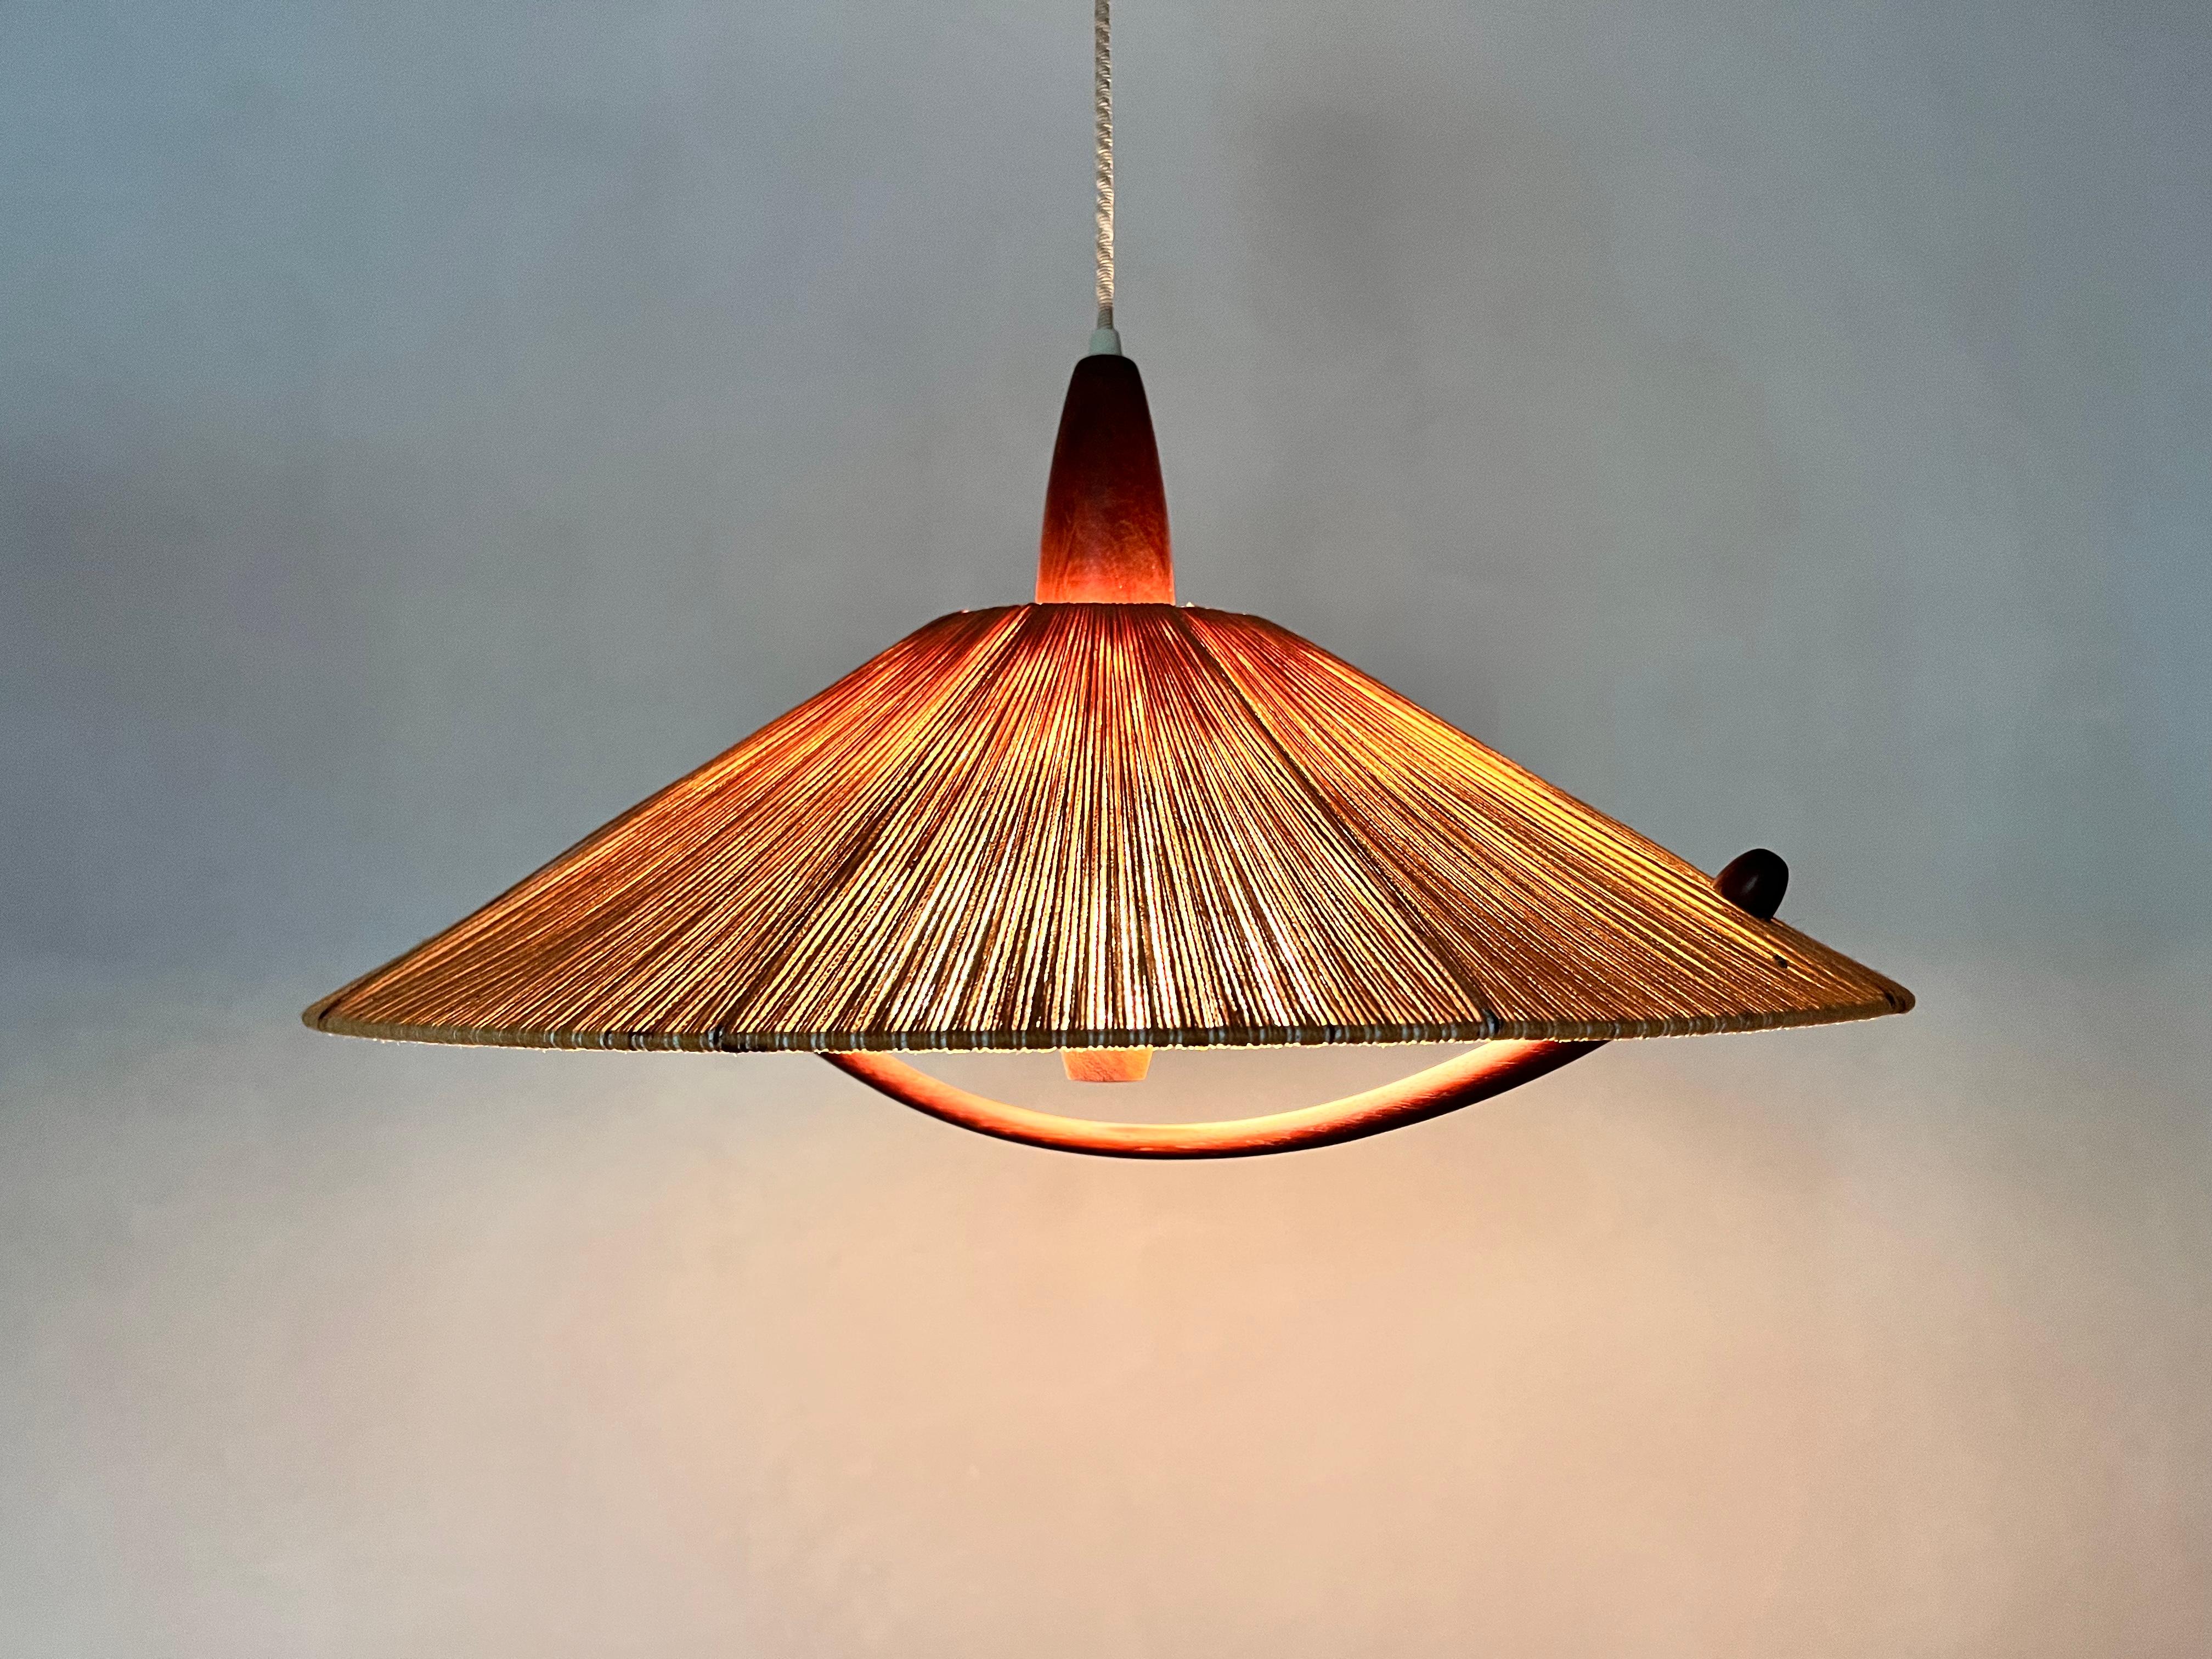 Midcentury Teak and Cord Shade Hanging Lamp by Temde, circa 1960 For Sale 5